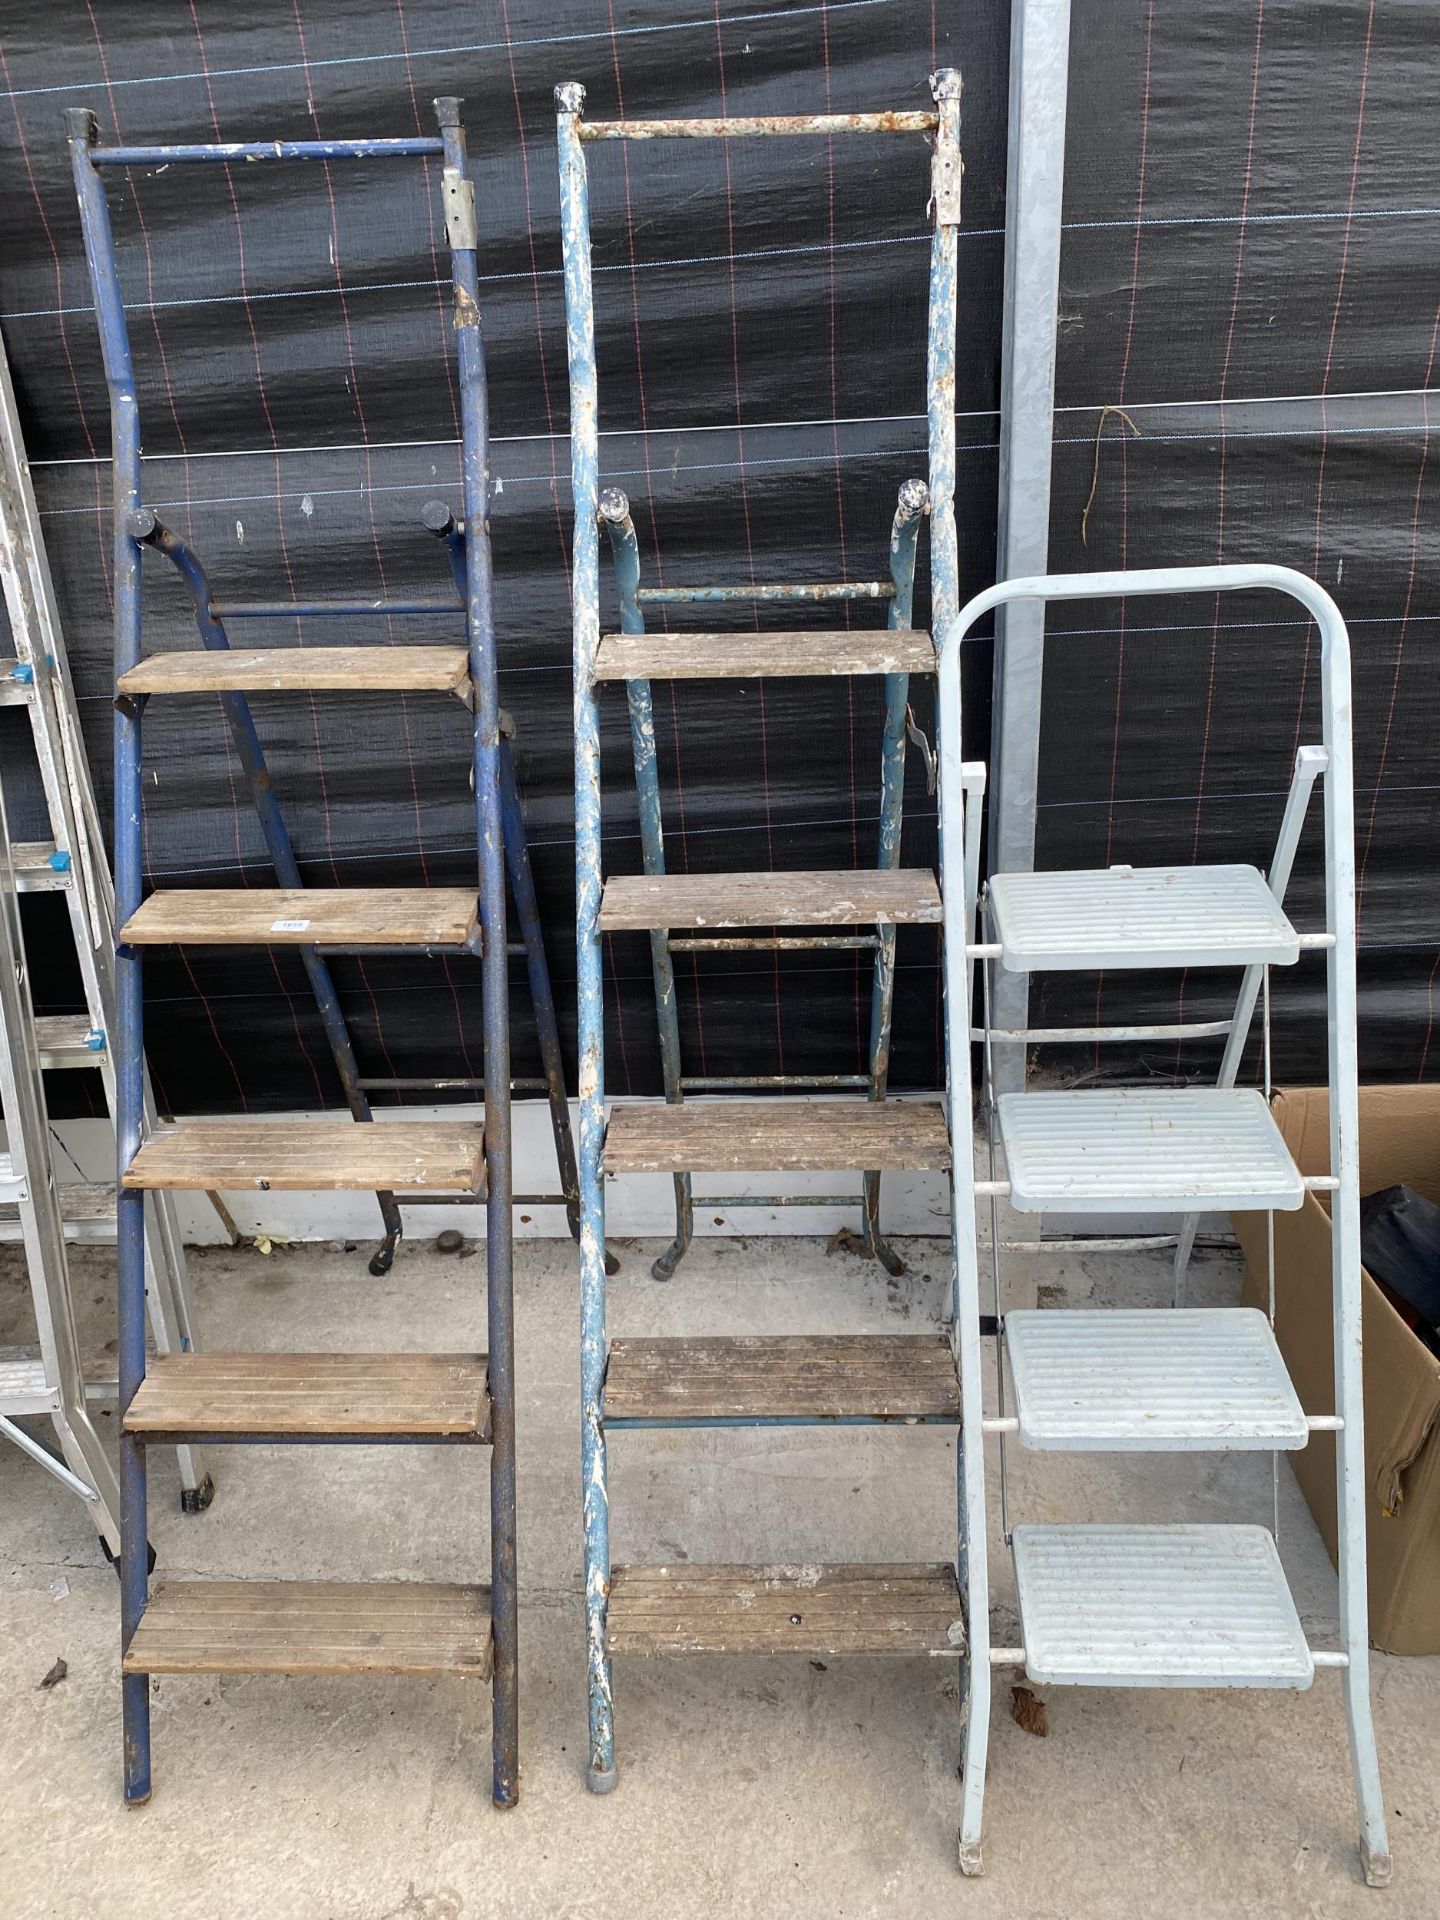 TWO FIVE RUNG TUBULAR METAL STEP LADDERS AND A FURTHER METAL THREE RUNG STEP LADDER